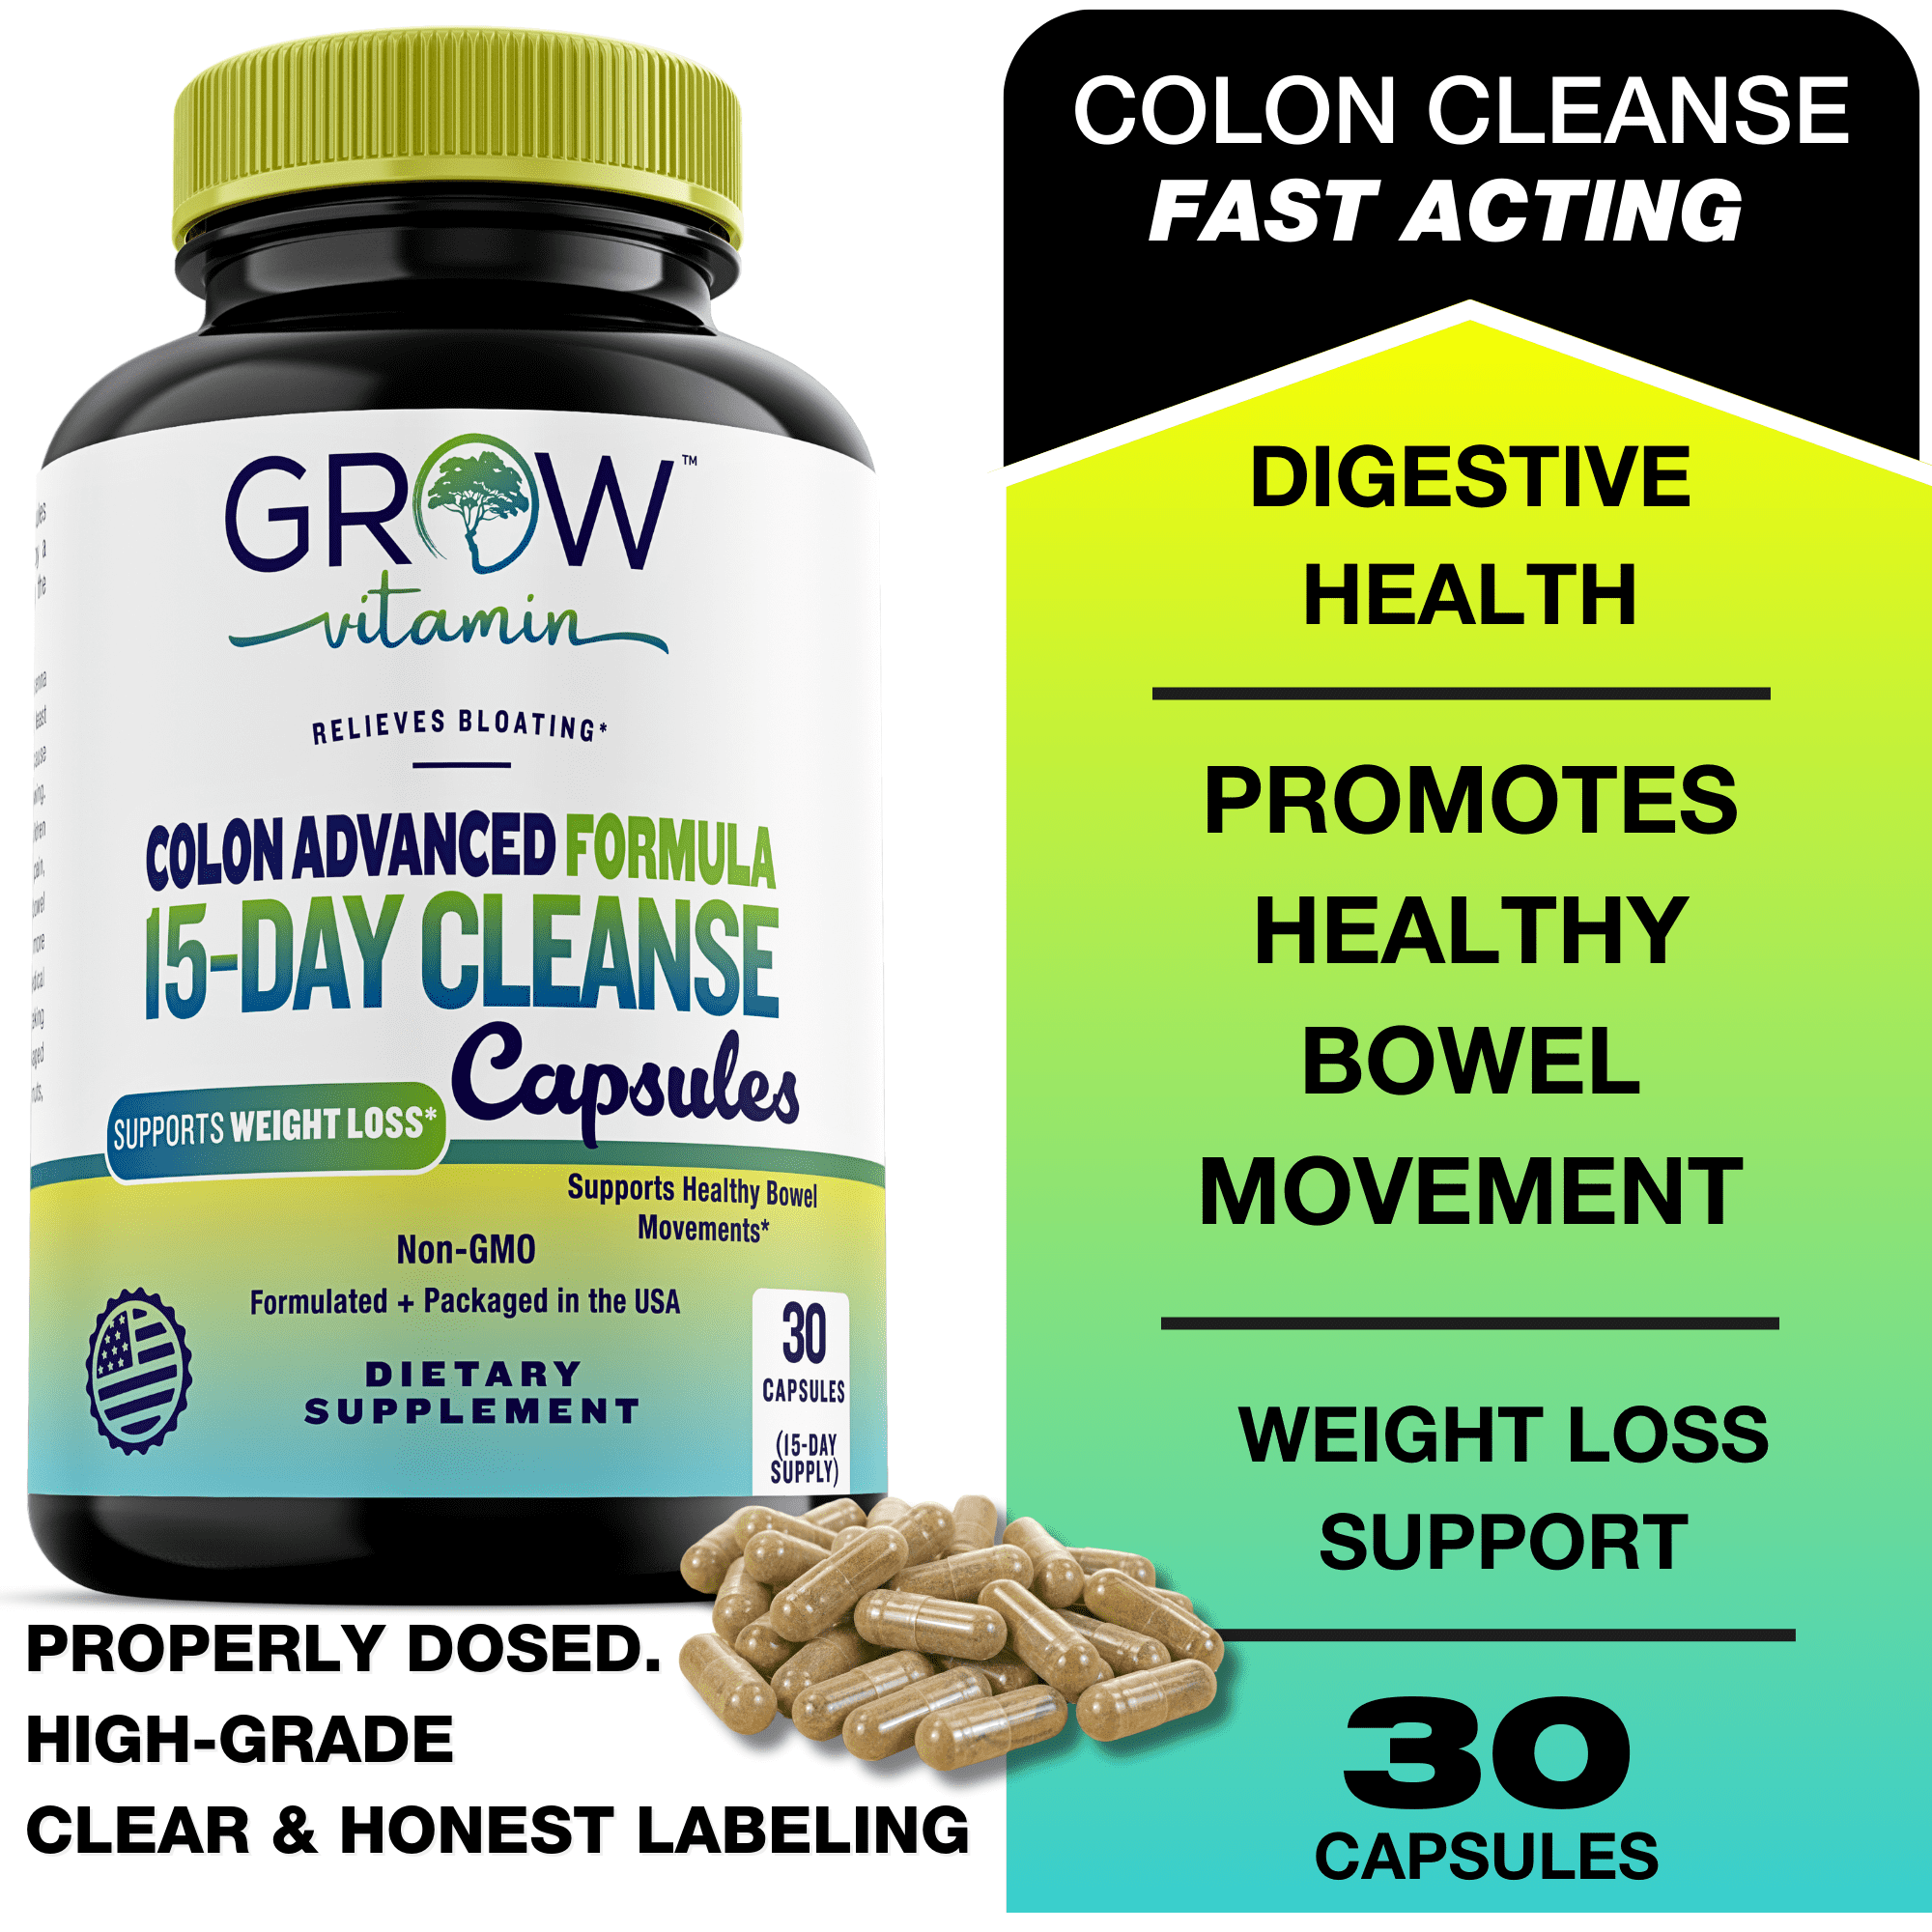 Colon cleanse for a fresh start